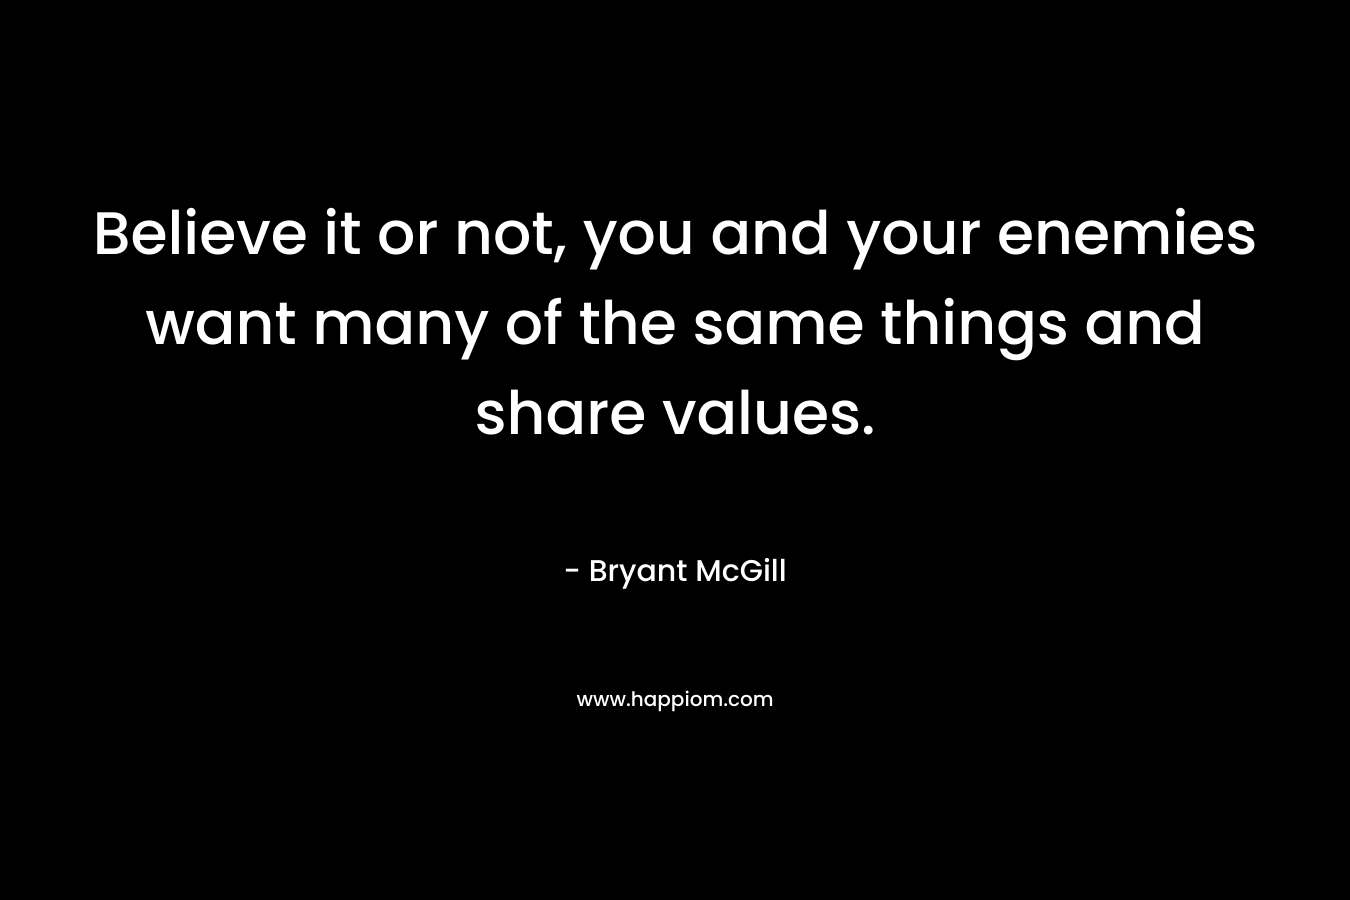 Believe it or not, you and your enemies want many of the same things and share values. – Bryant McGill